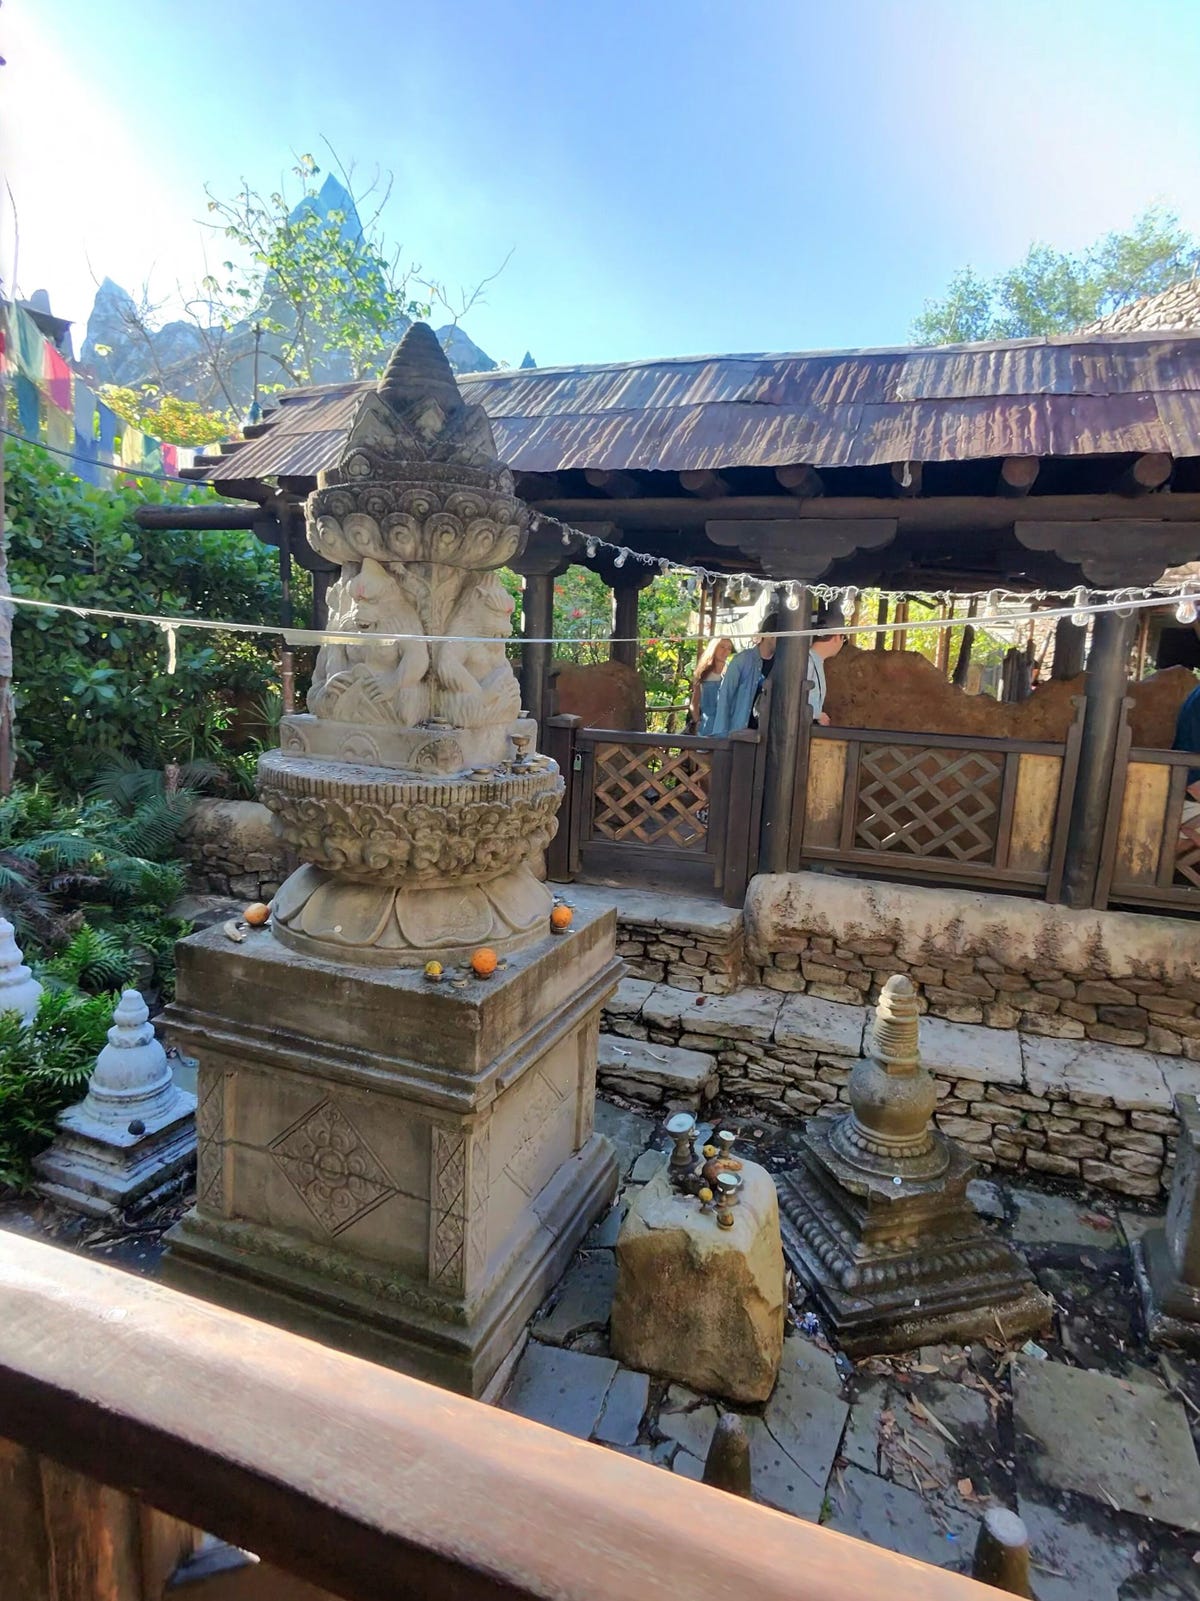 A photo of an ancient courtyard, part of a theme park ride line at Disney